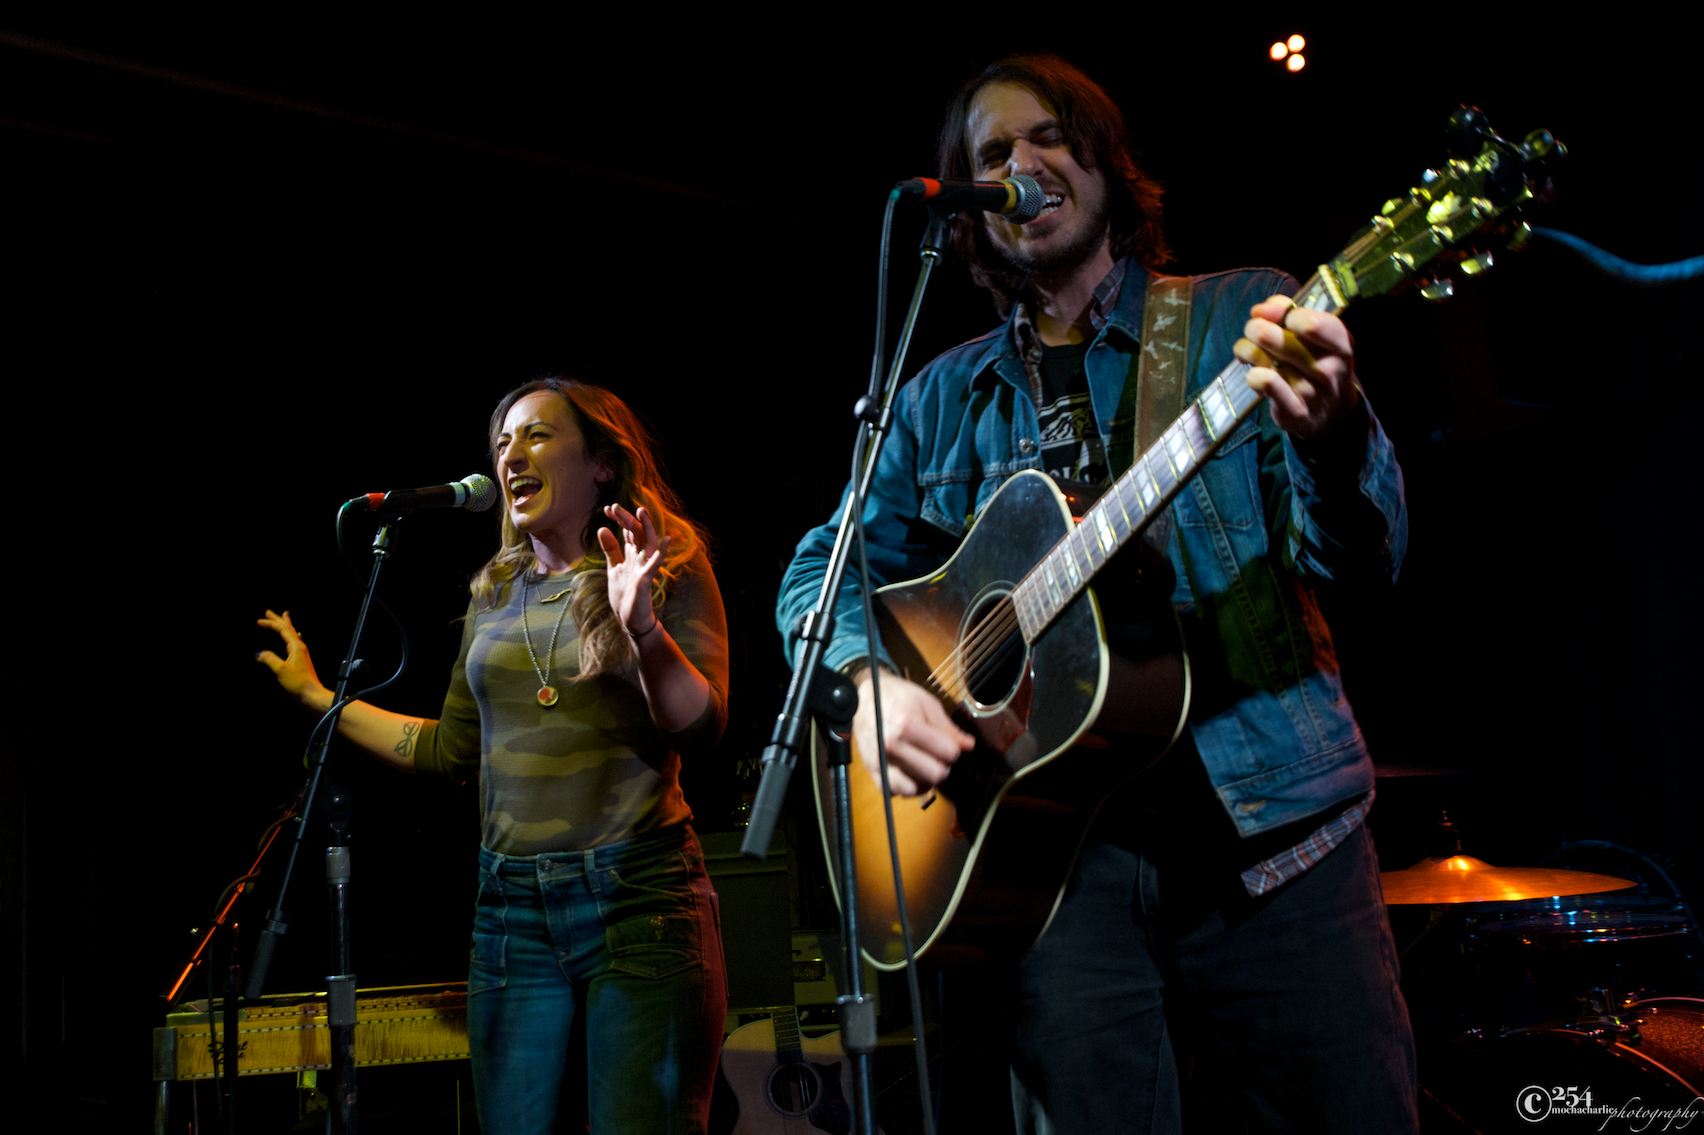 Bradley Laina & Taylor Lynn of Vaudeville Etiquette at The Tractor Tavern (Photo by Mocha Charlie)